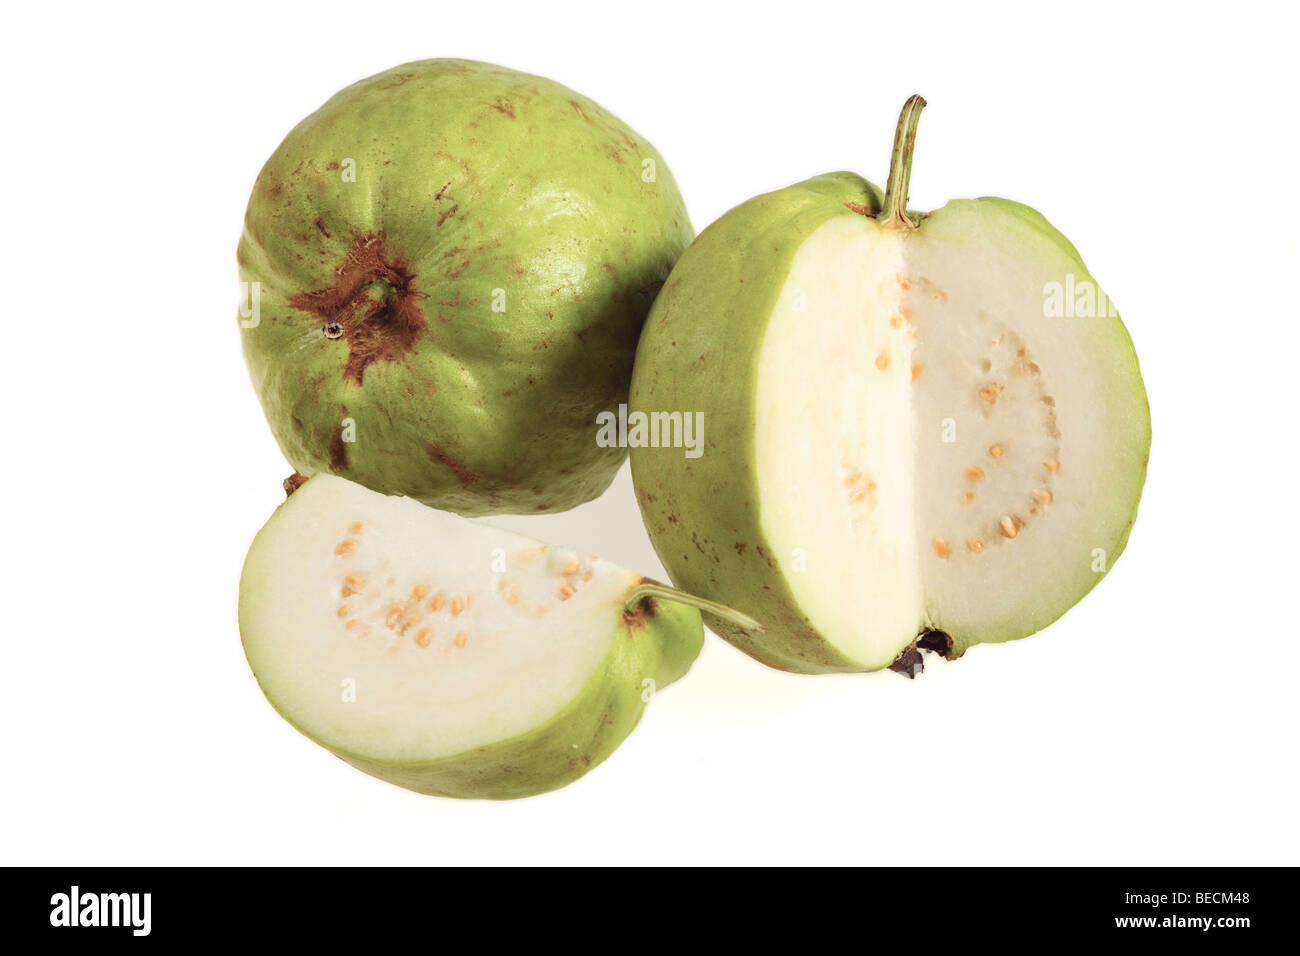 Two apple guava fruits, one of them cut open, on a white background. Stock Photo